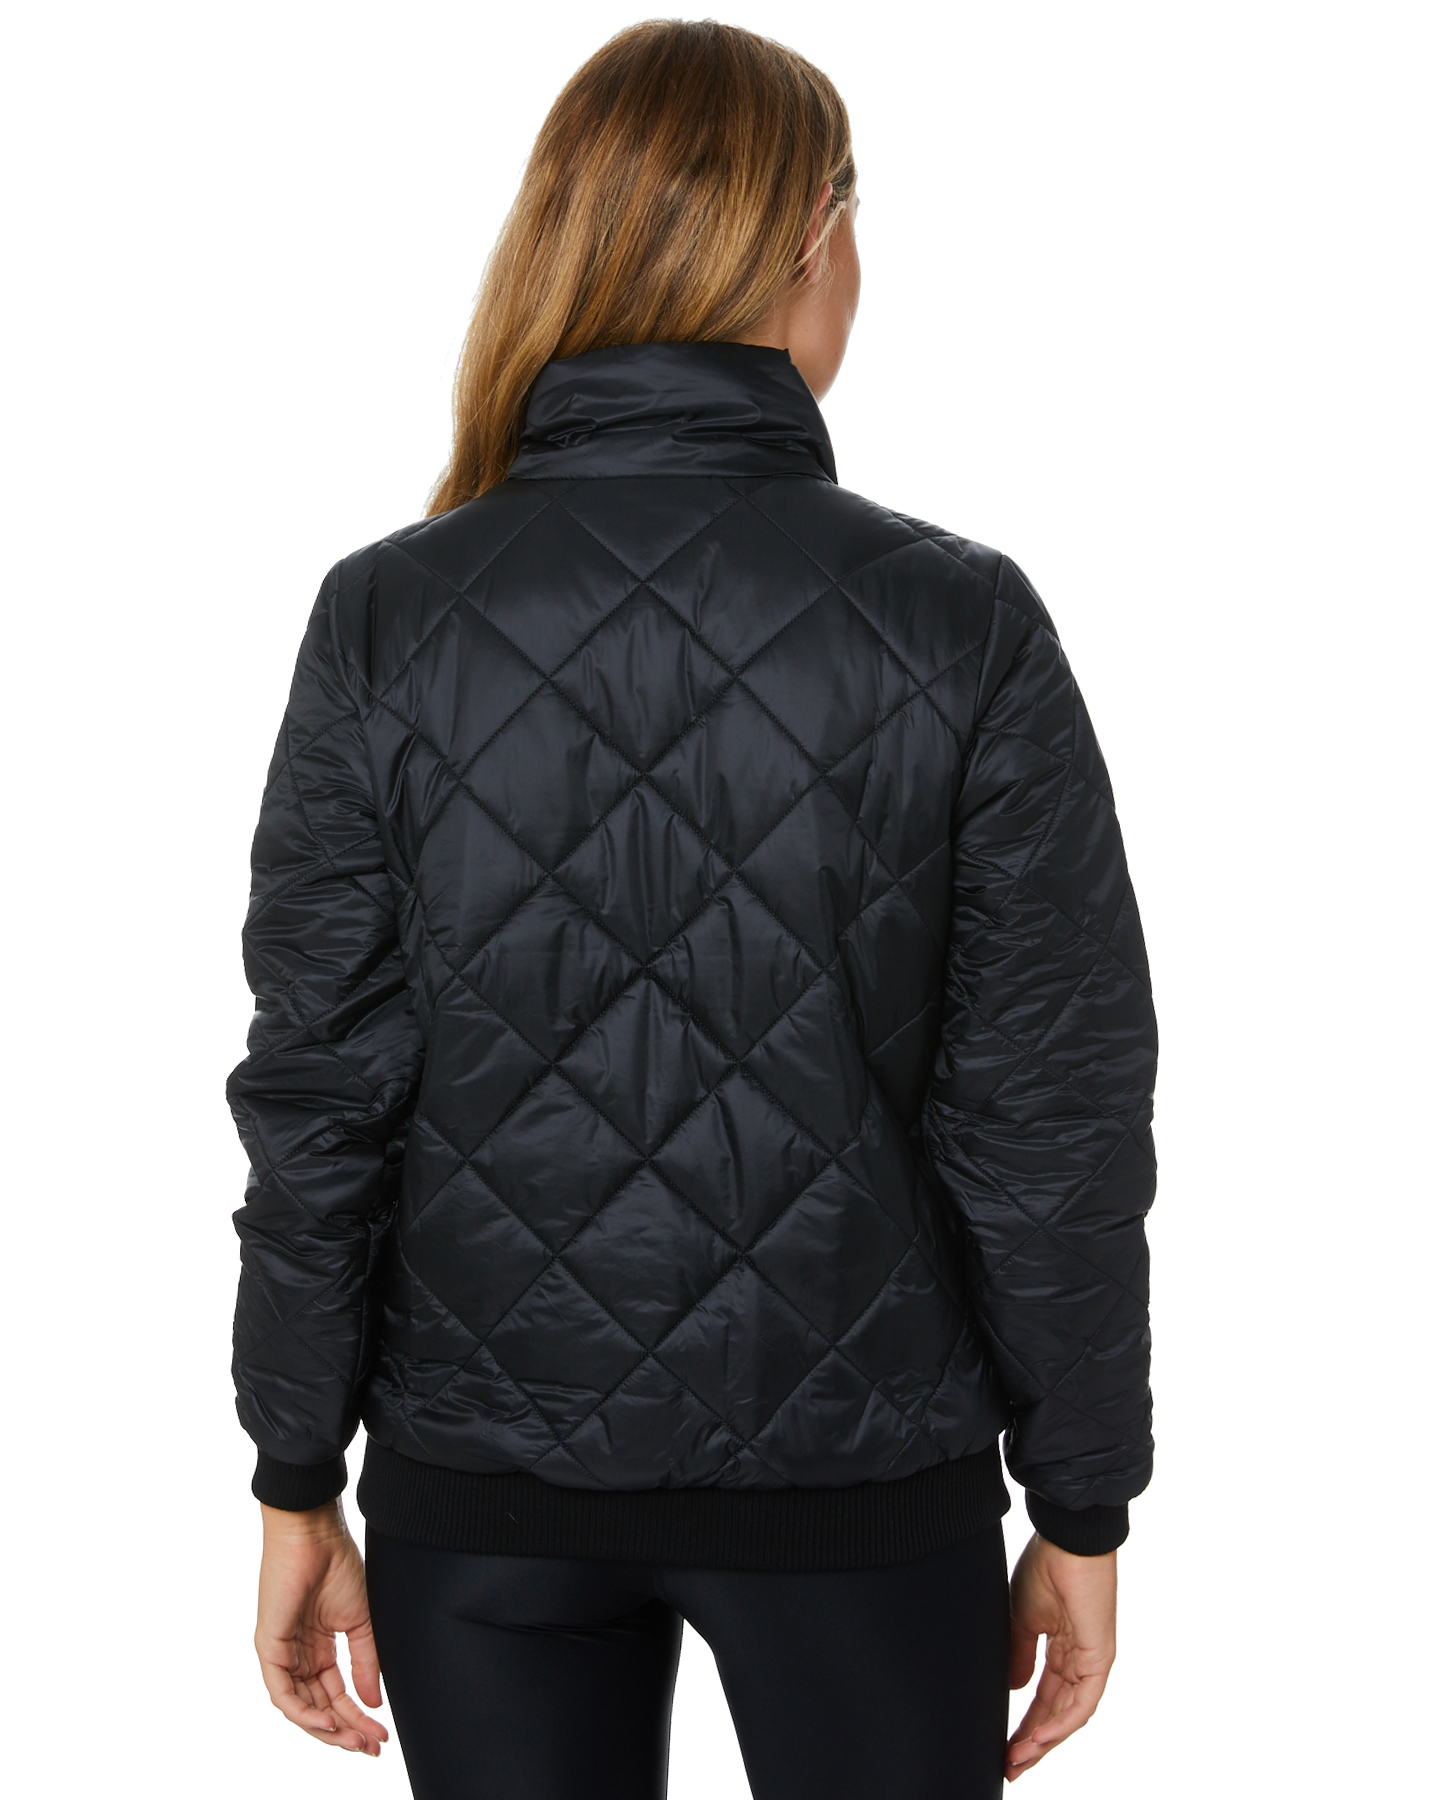 Patagonia Womens Prow Bomber Jacket - Black | SurfStitch